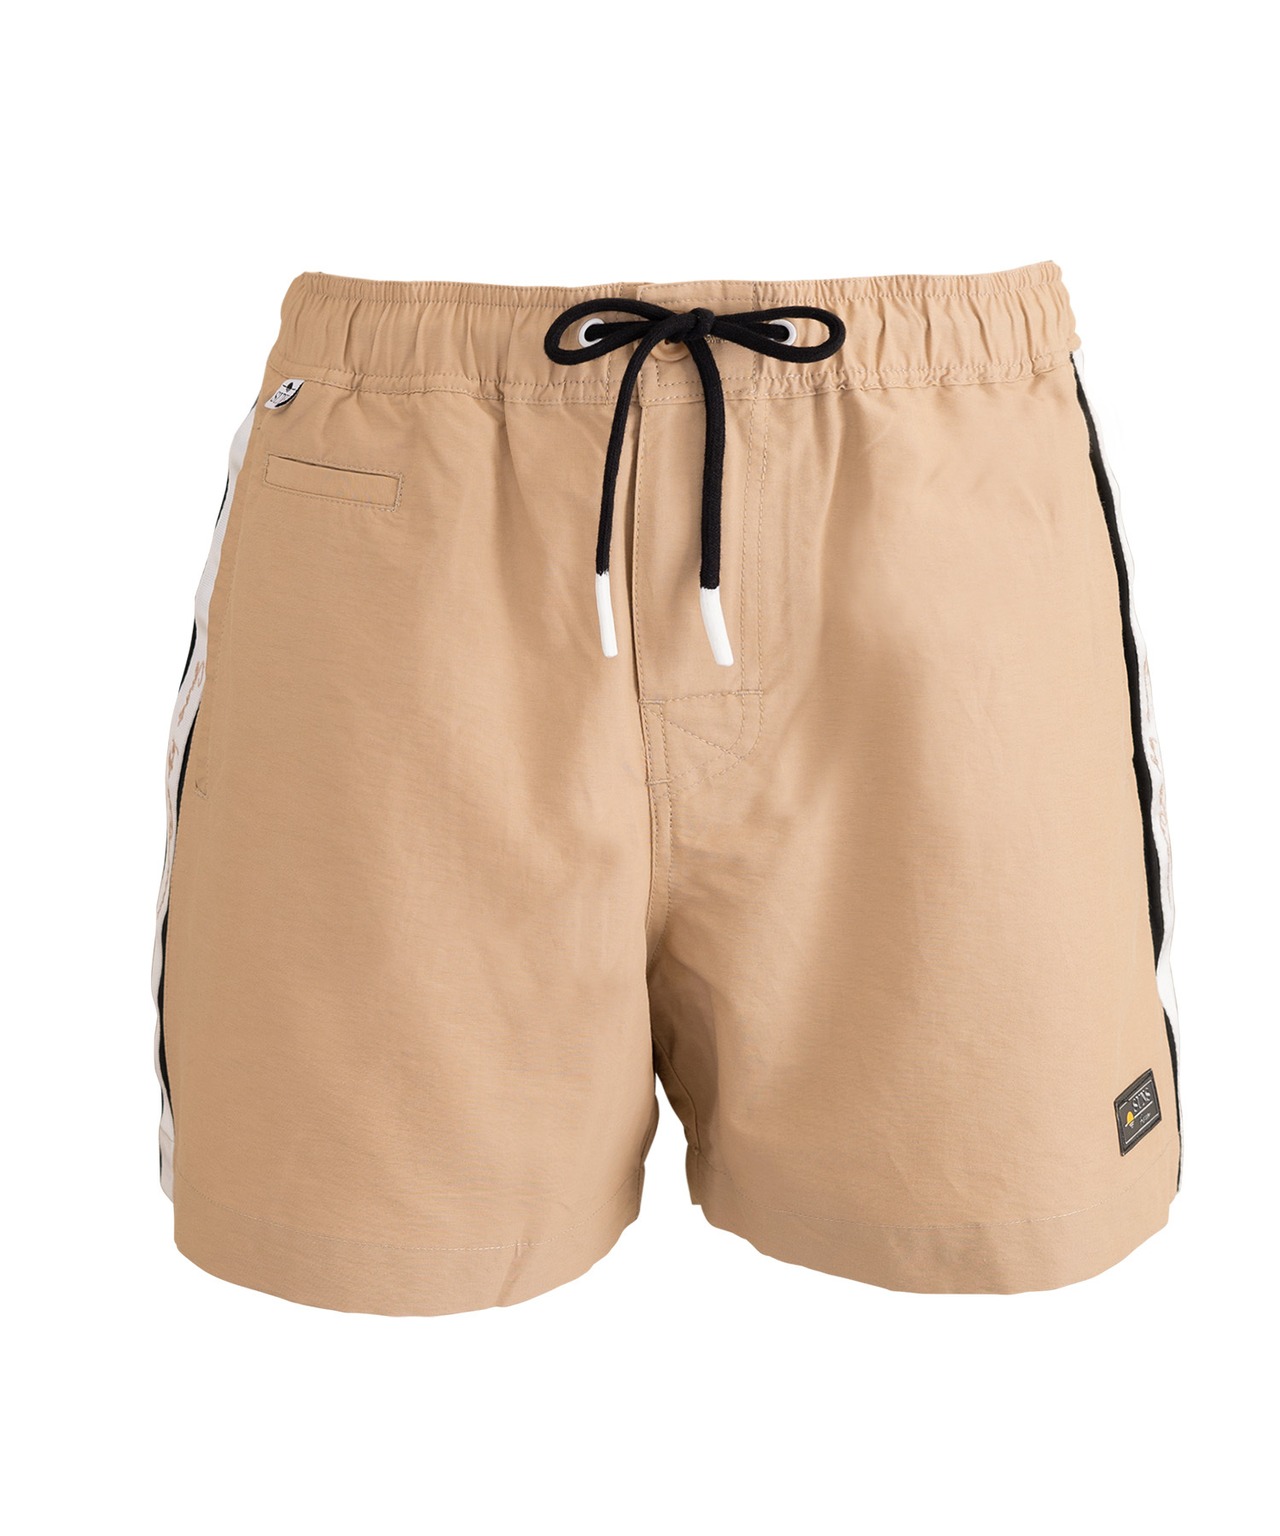 【SUNS】SIDE LINE LOGO EMBROIDERY BOARD SHORTS［RSW062］